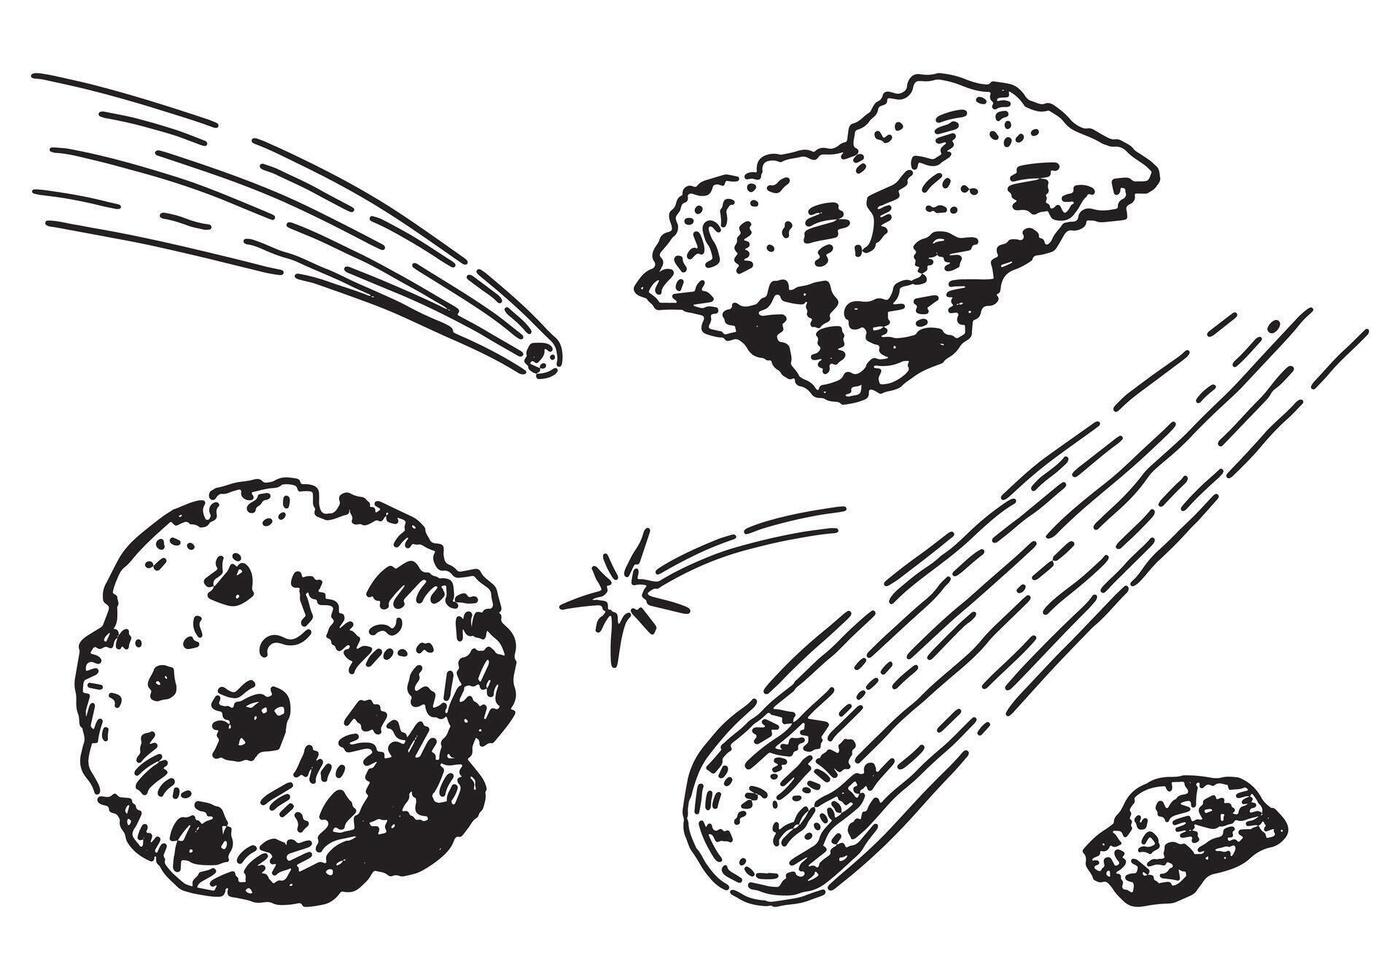 Cosmic space doodles set. Outline drawings of meteor, comets, asteroids. Astronomy science sketches. Hand drawn vector illustration isolated on white.